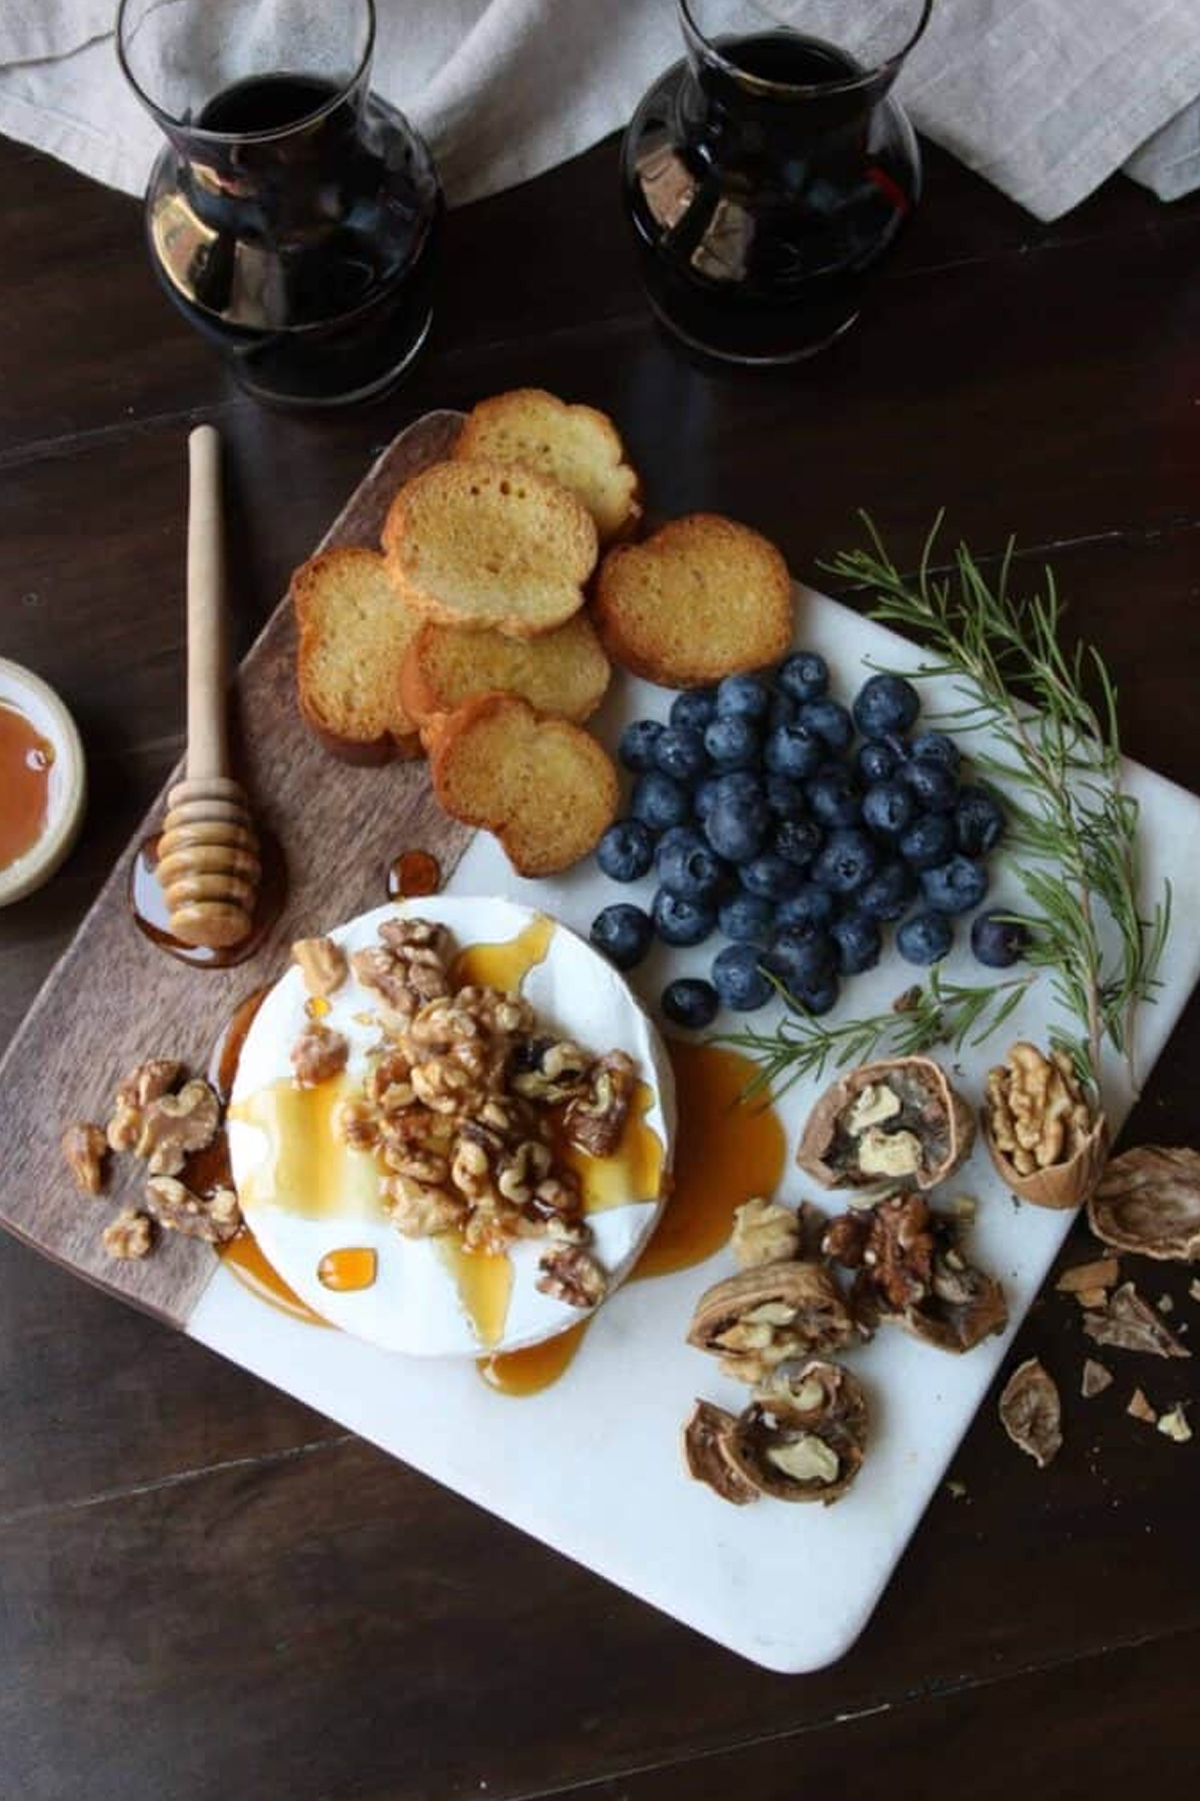 Brie cheese, honey, berries, and bread are shown on Kindly Sweets warm brie charcuterie board.